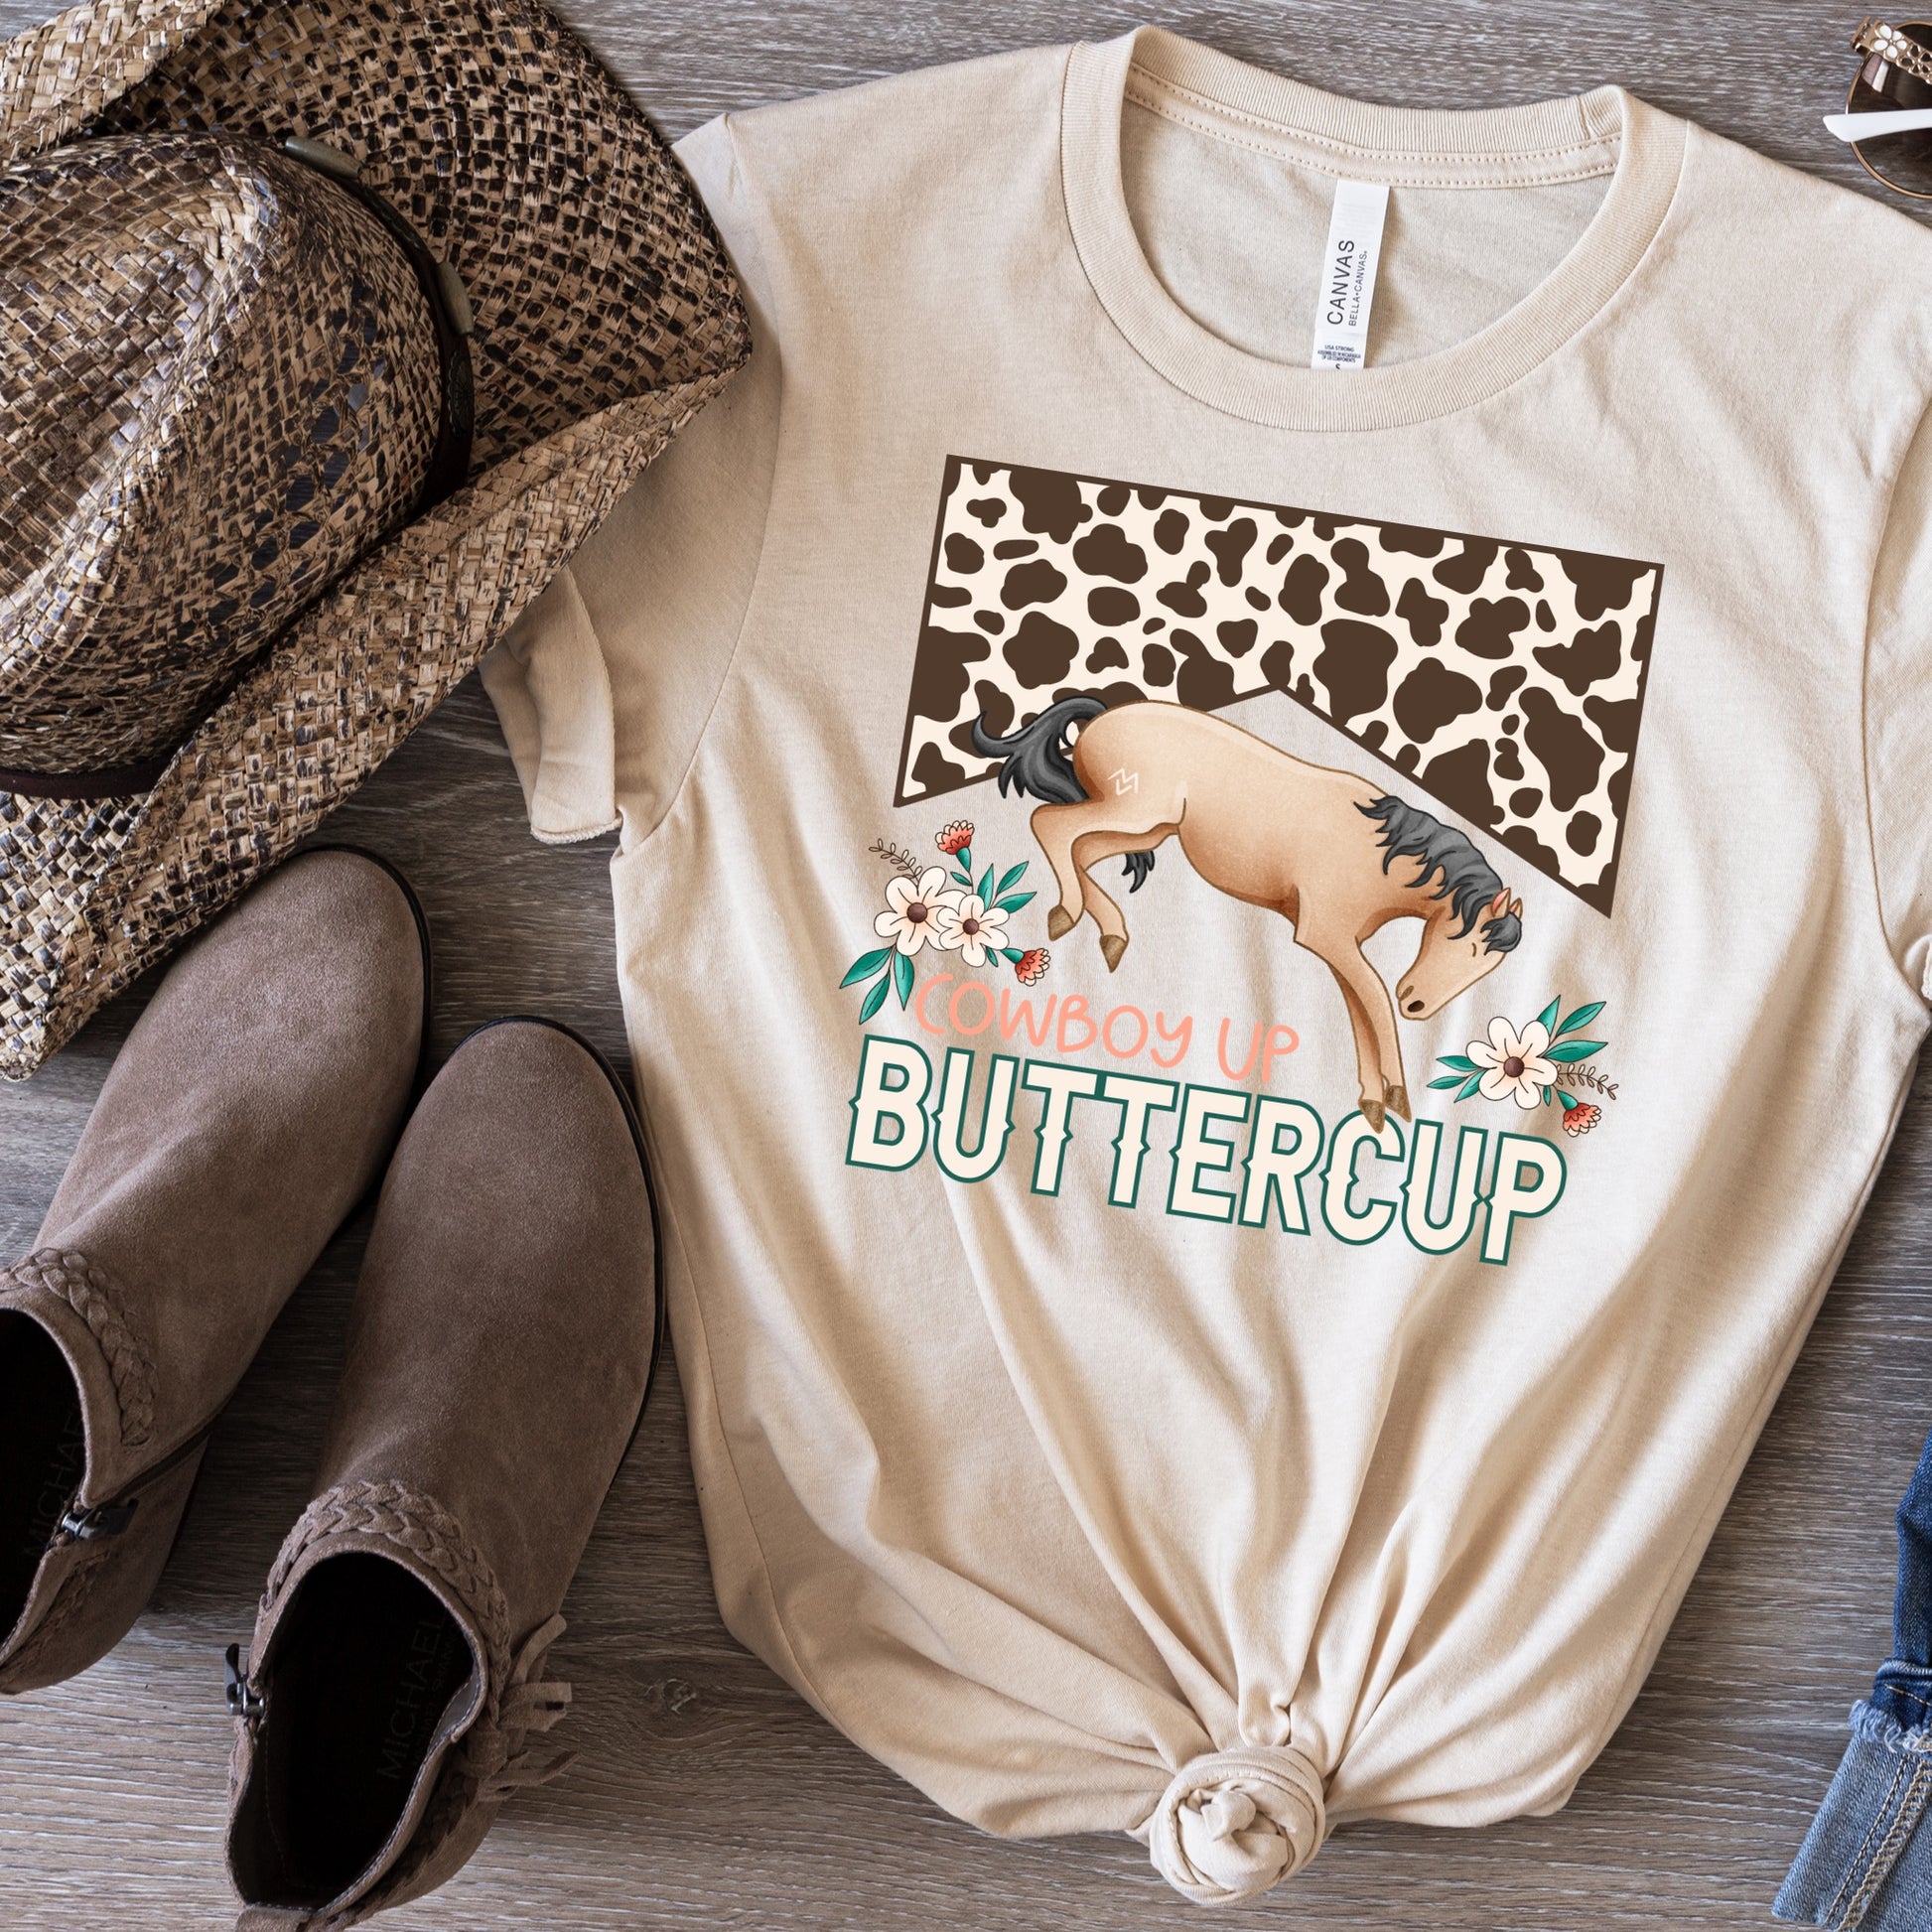 Western and horse themed "Cowboy Up Buttercup"  Heat Transfer  - DTF - Sublimation 